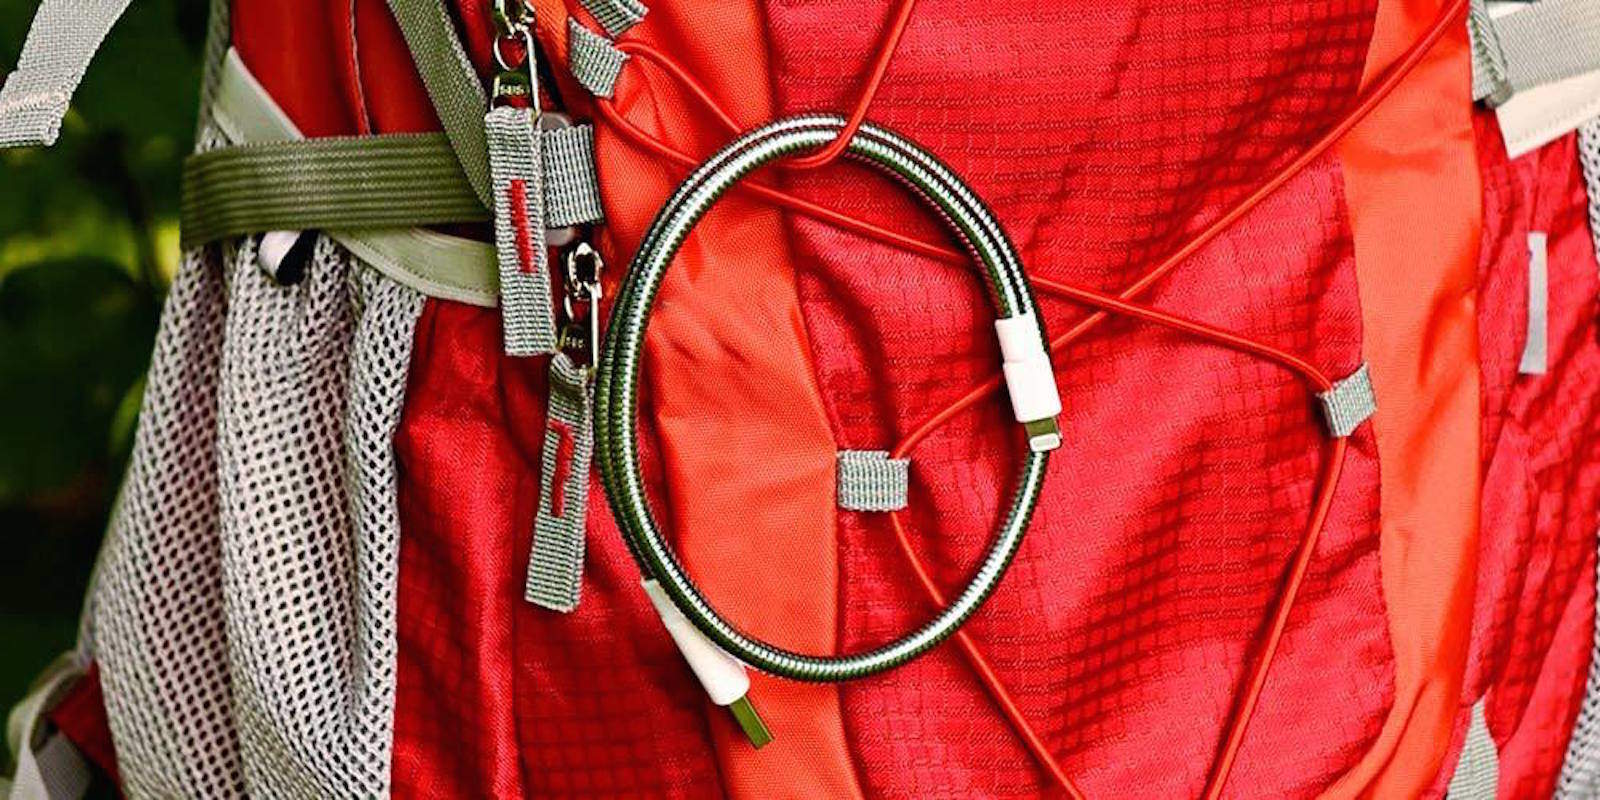 This is your last chance to nab these travel-ready, super tough, steel-lined Lightning cables.